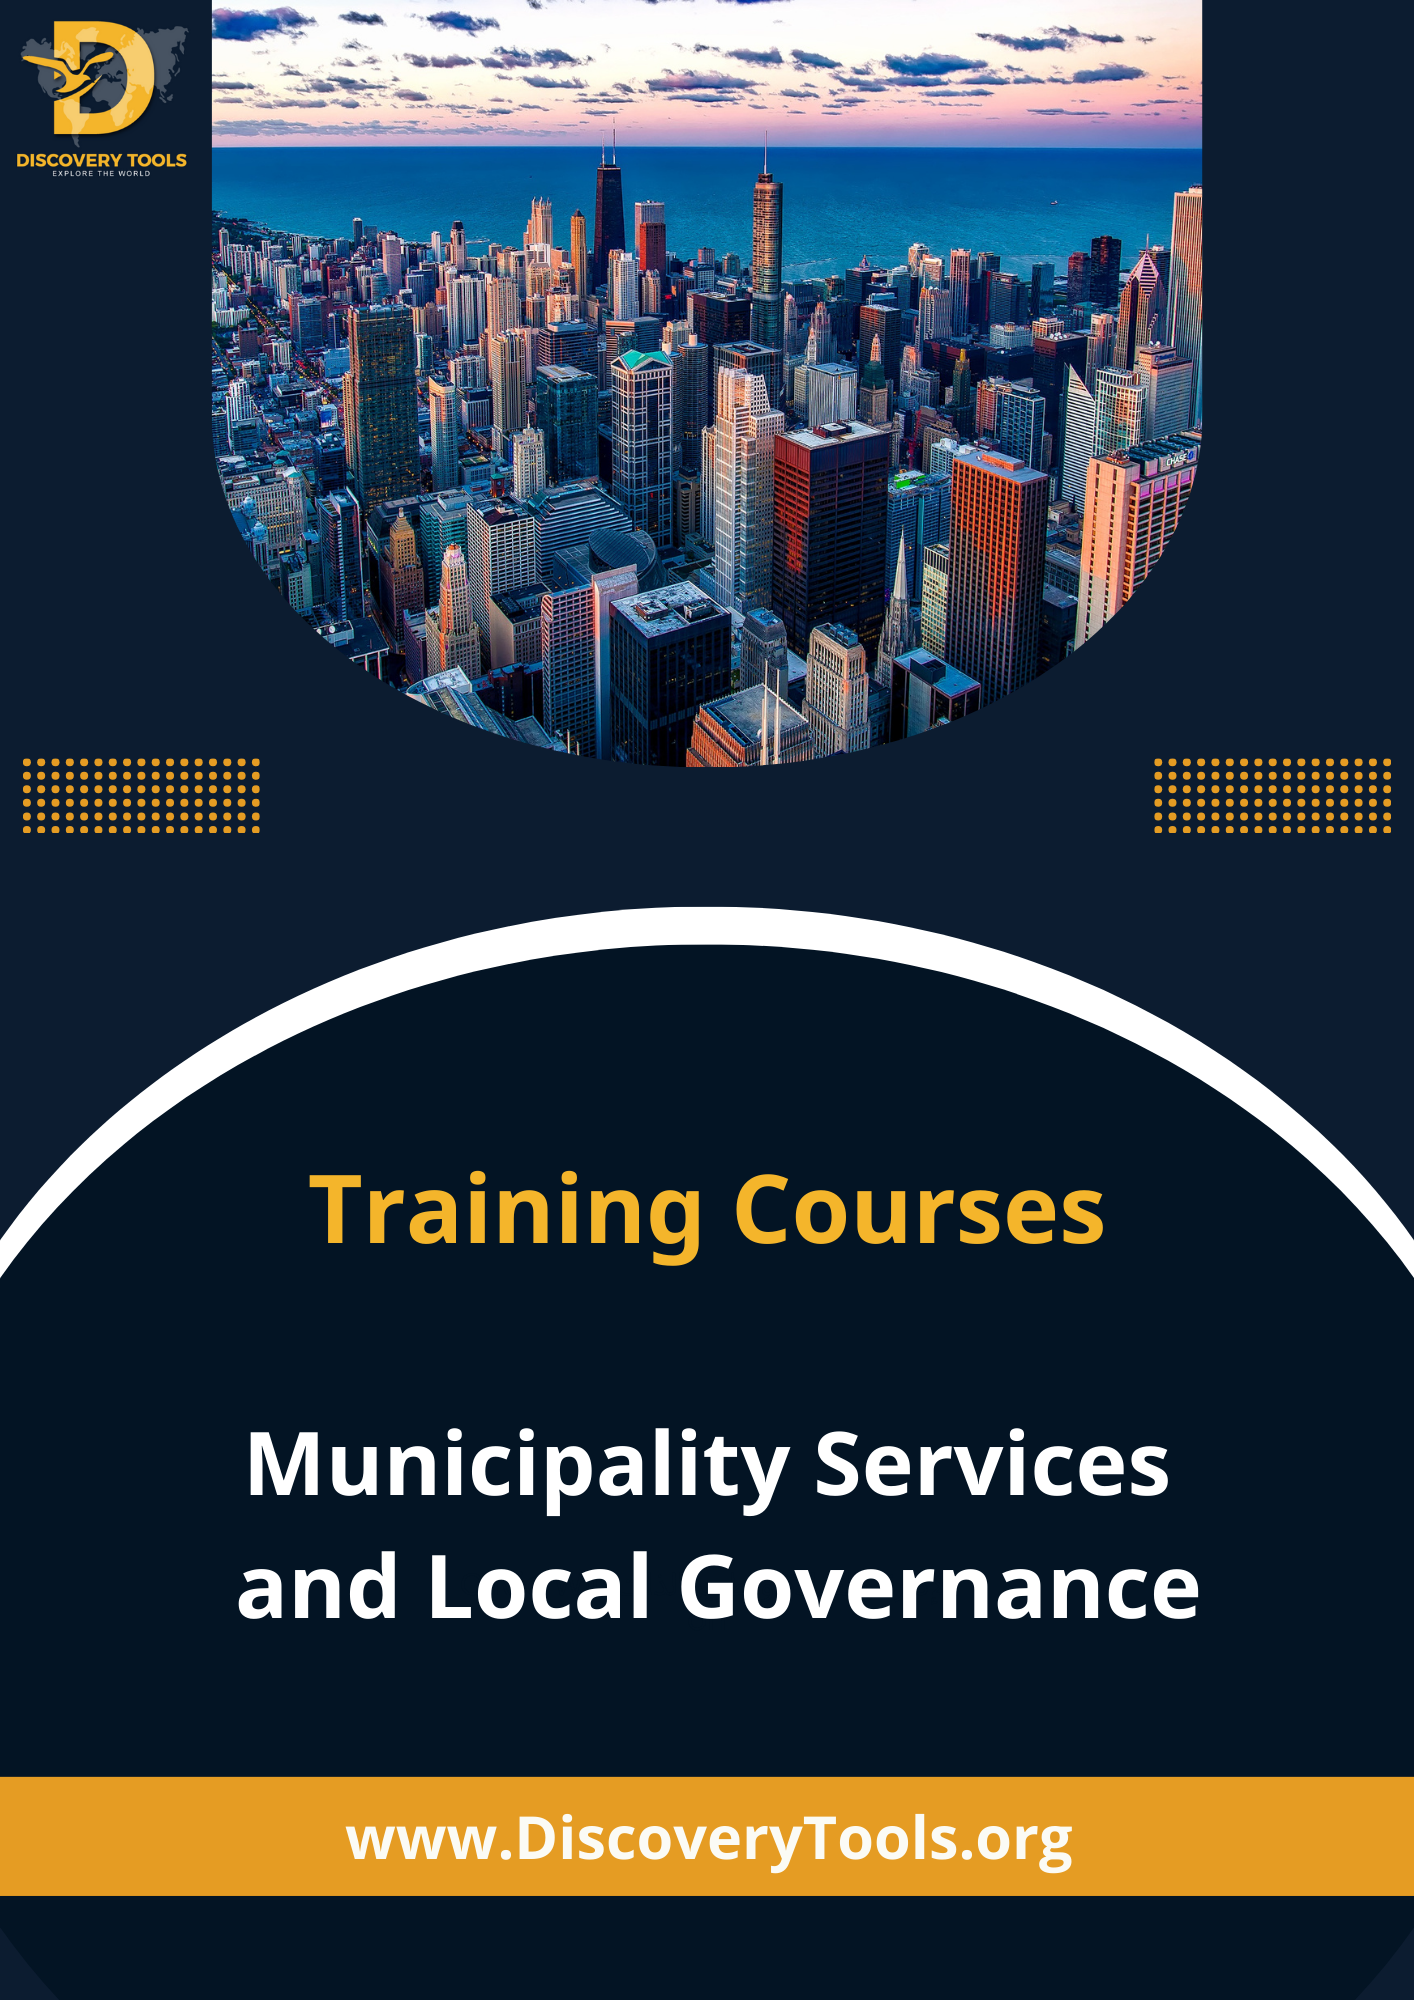 Municipality Services and Local Governance